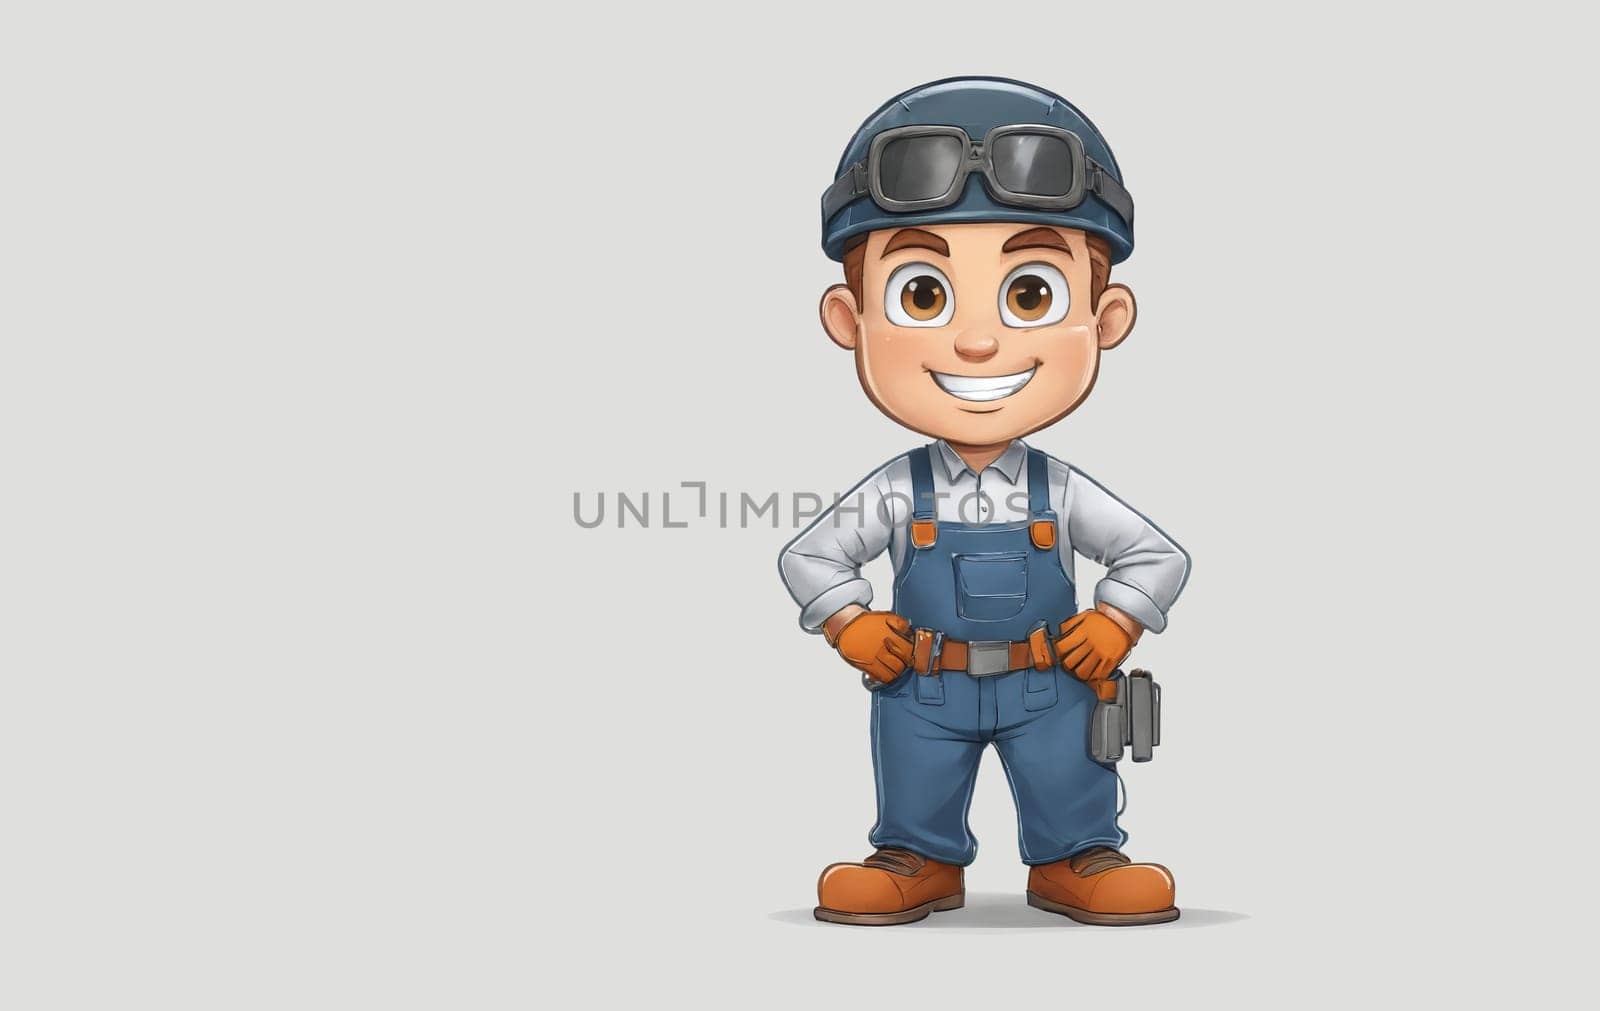 Cartoon construction worker with helmet, goggles, and a smile by Andre1ns